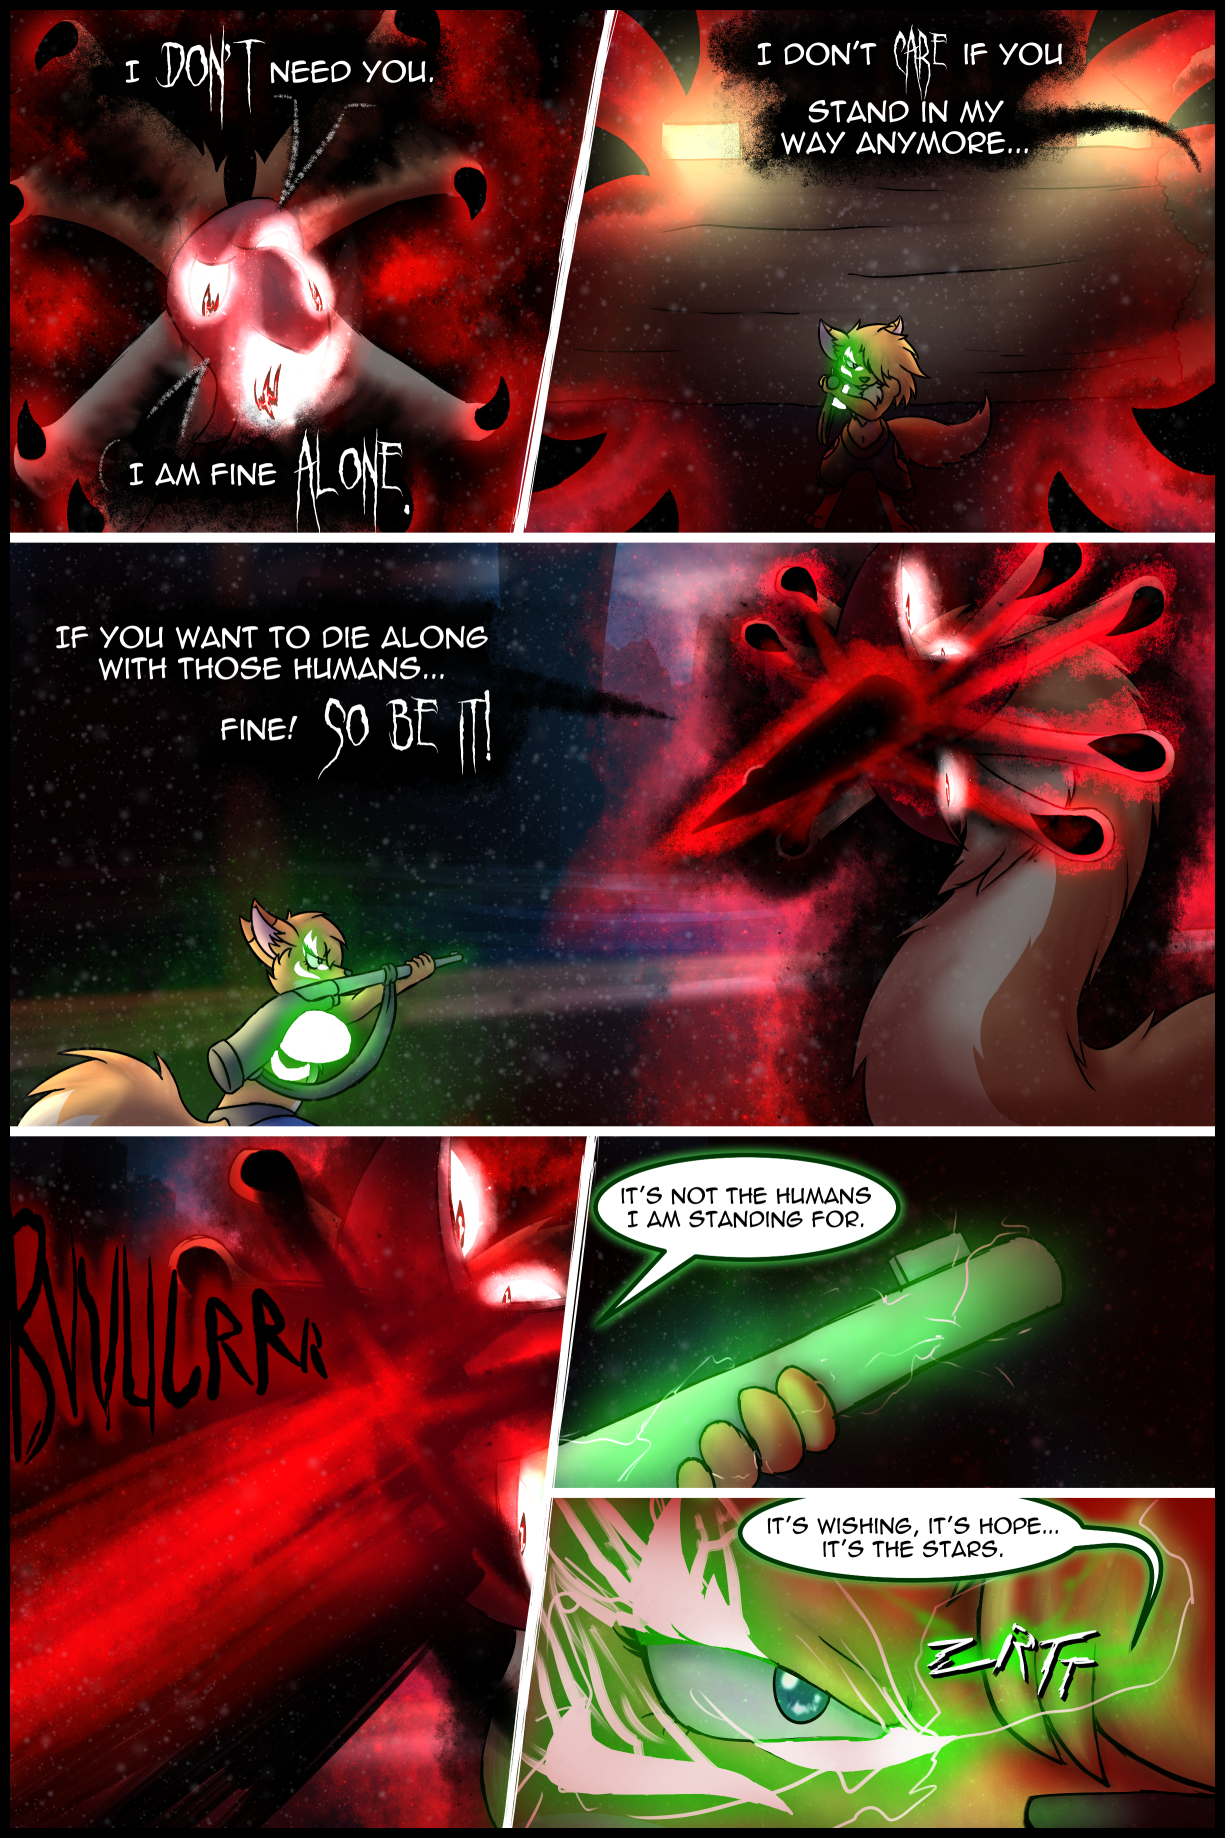 Ch3 Page 52 – What I Stand For